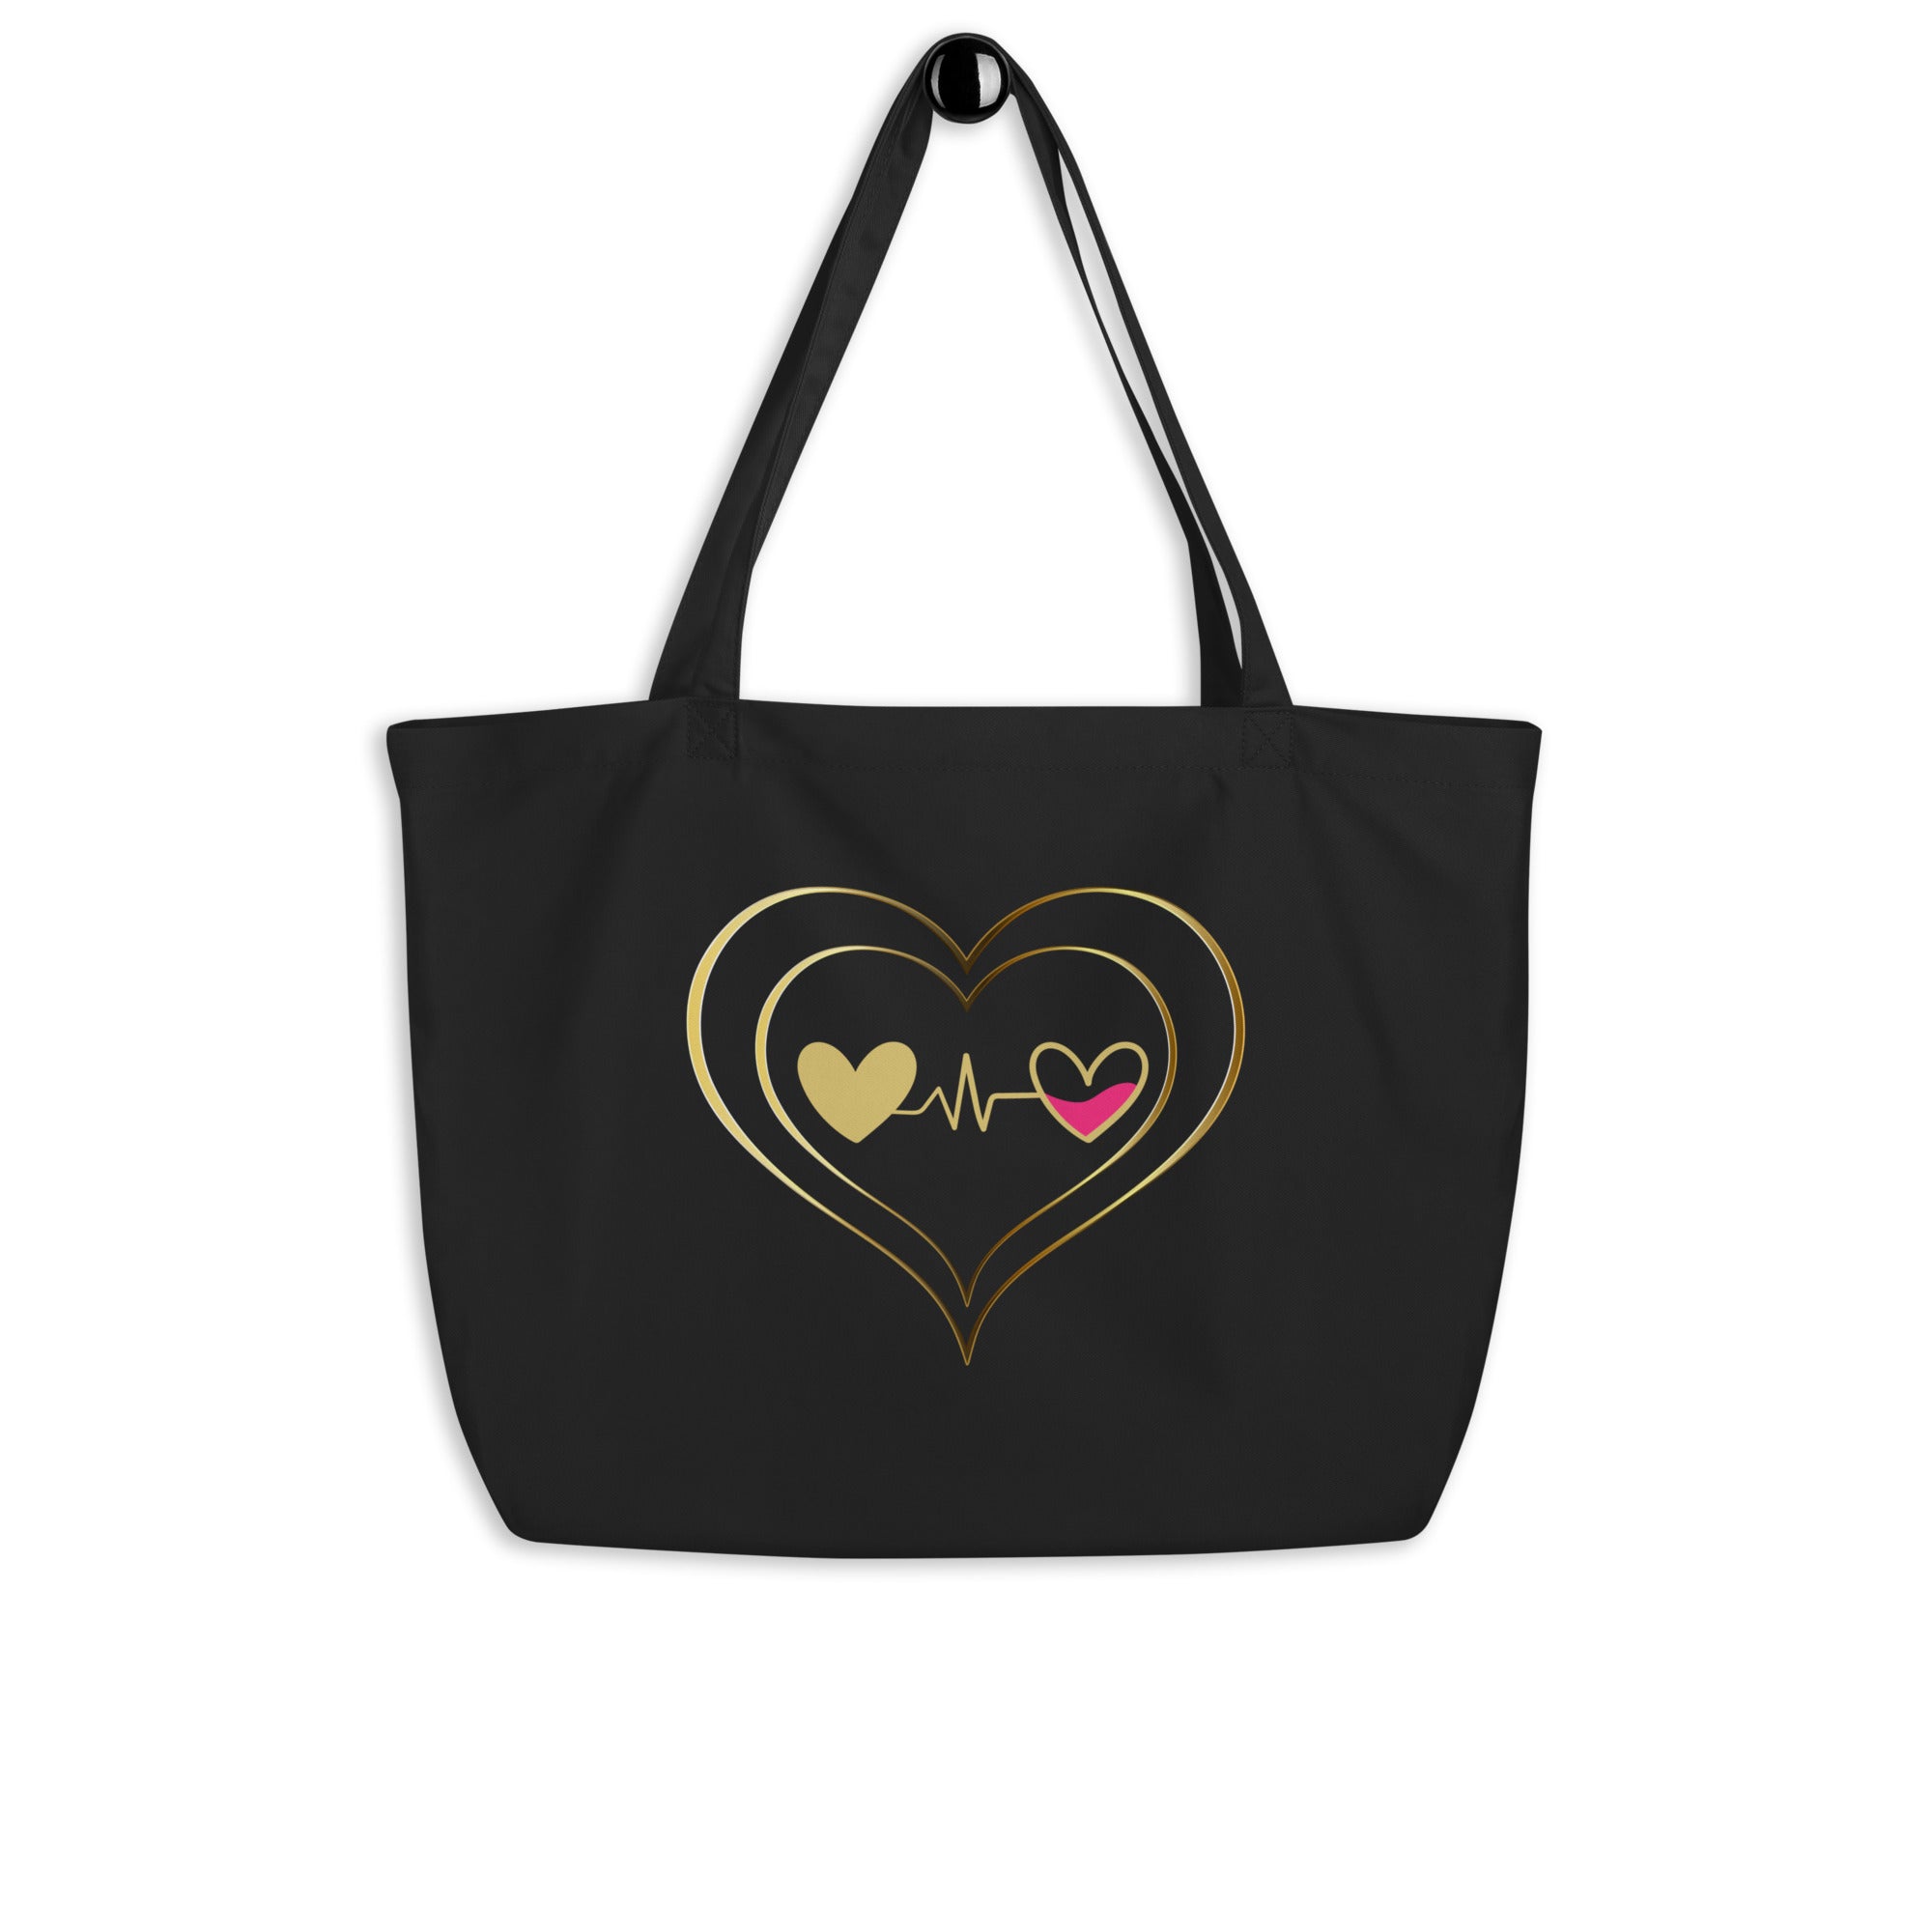 Connected Hearts Large organic tote bag